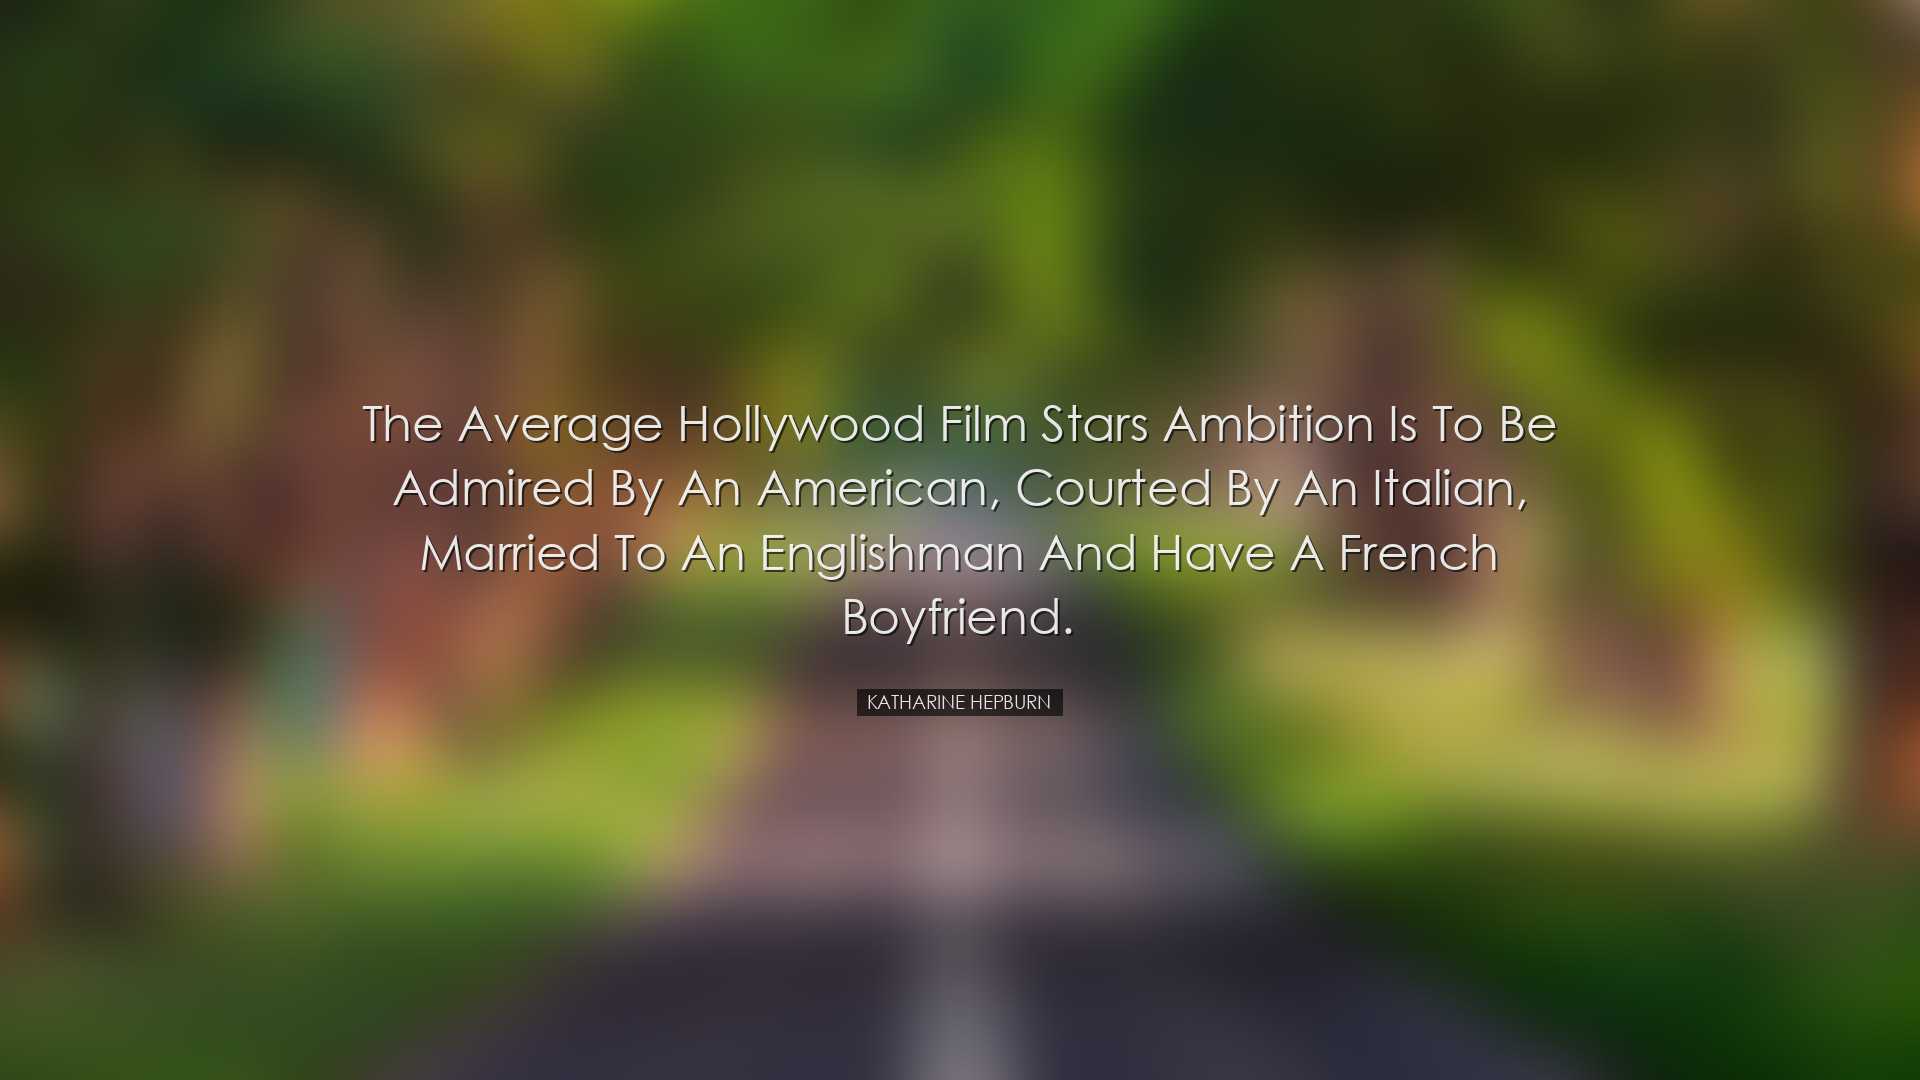 The average Hollywood film stars ambition is to be admired by an A